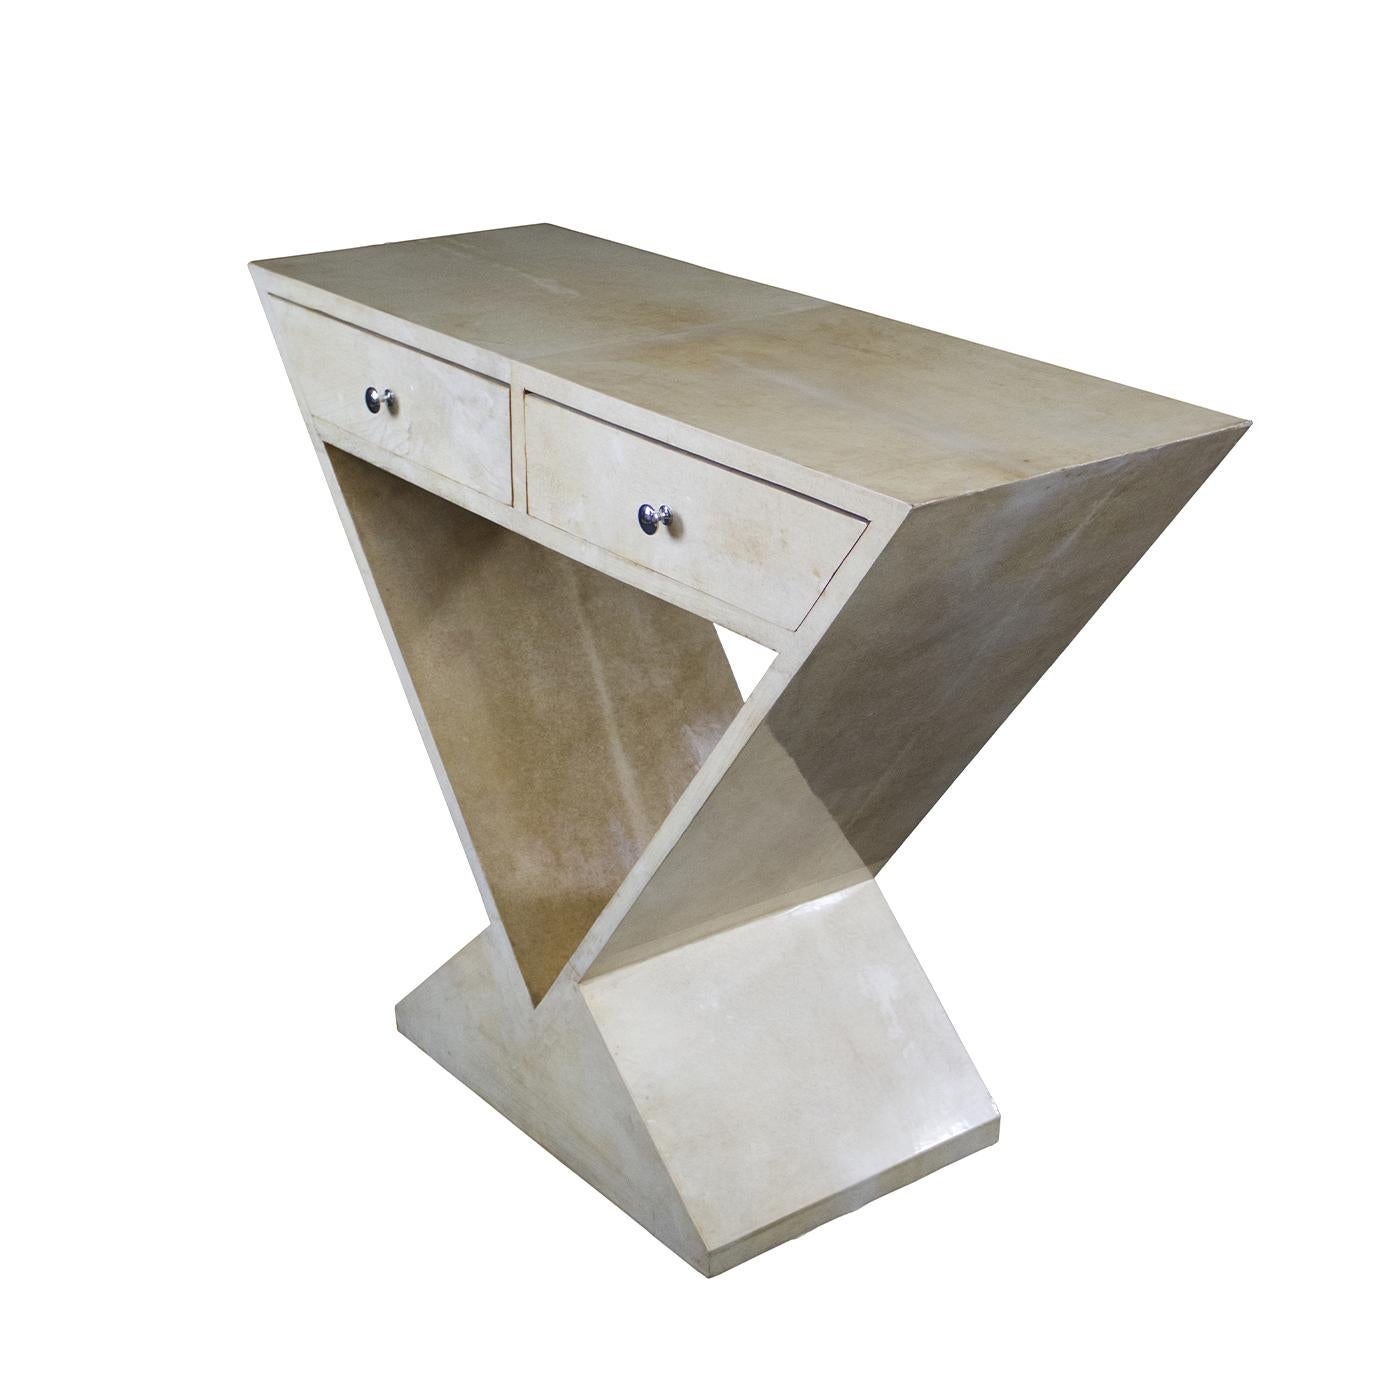 A must-have for any Art Deco-inspired entryway, this console brims with classy allure from its rigorous profile to the prized ivory-toned natural parchment (